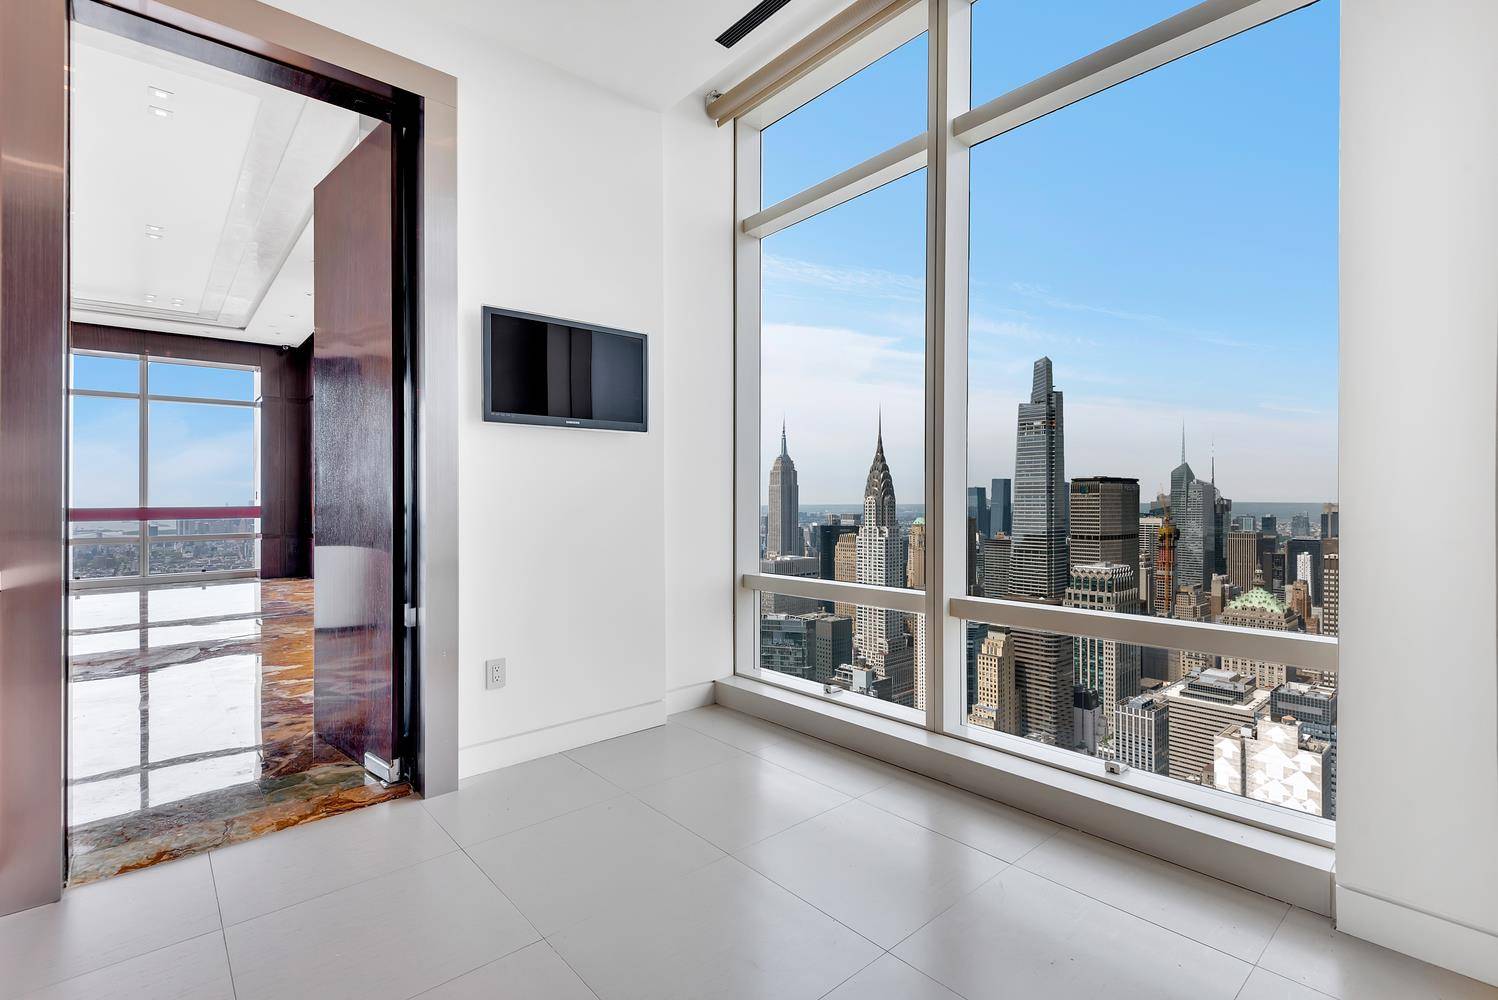 Experience penthouse living surrounded by 5, 400 square feet of iconic views.